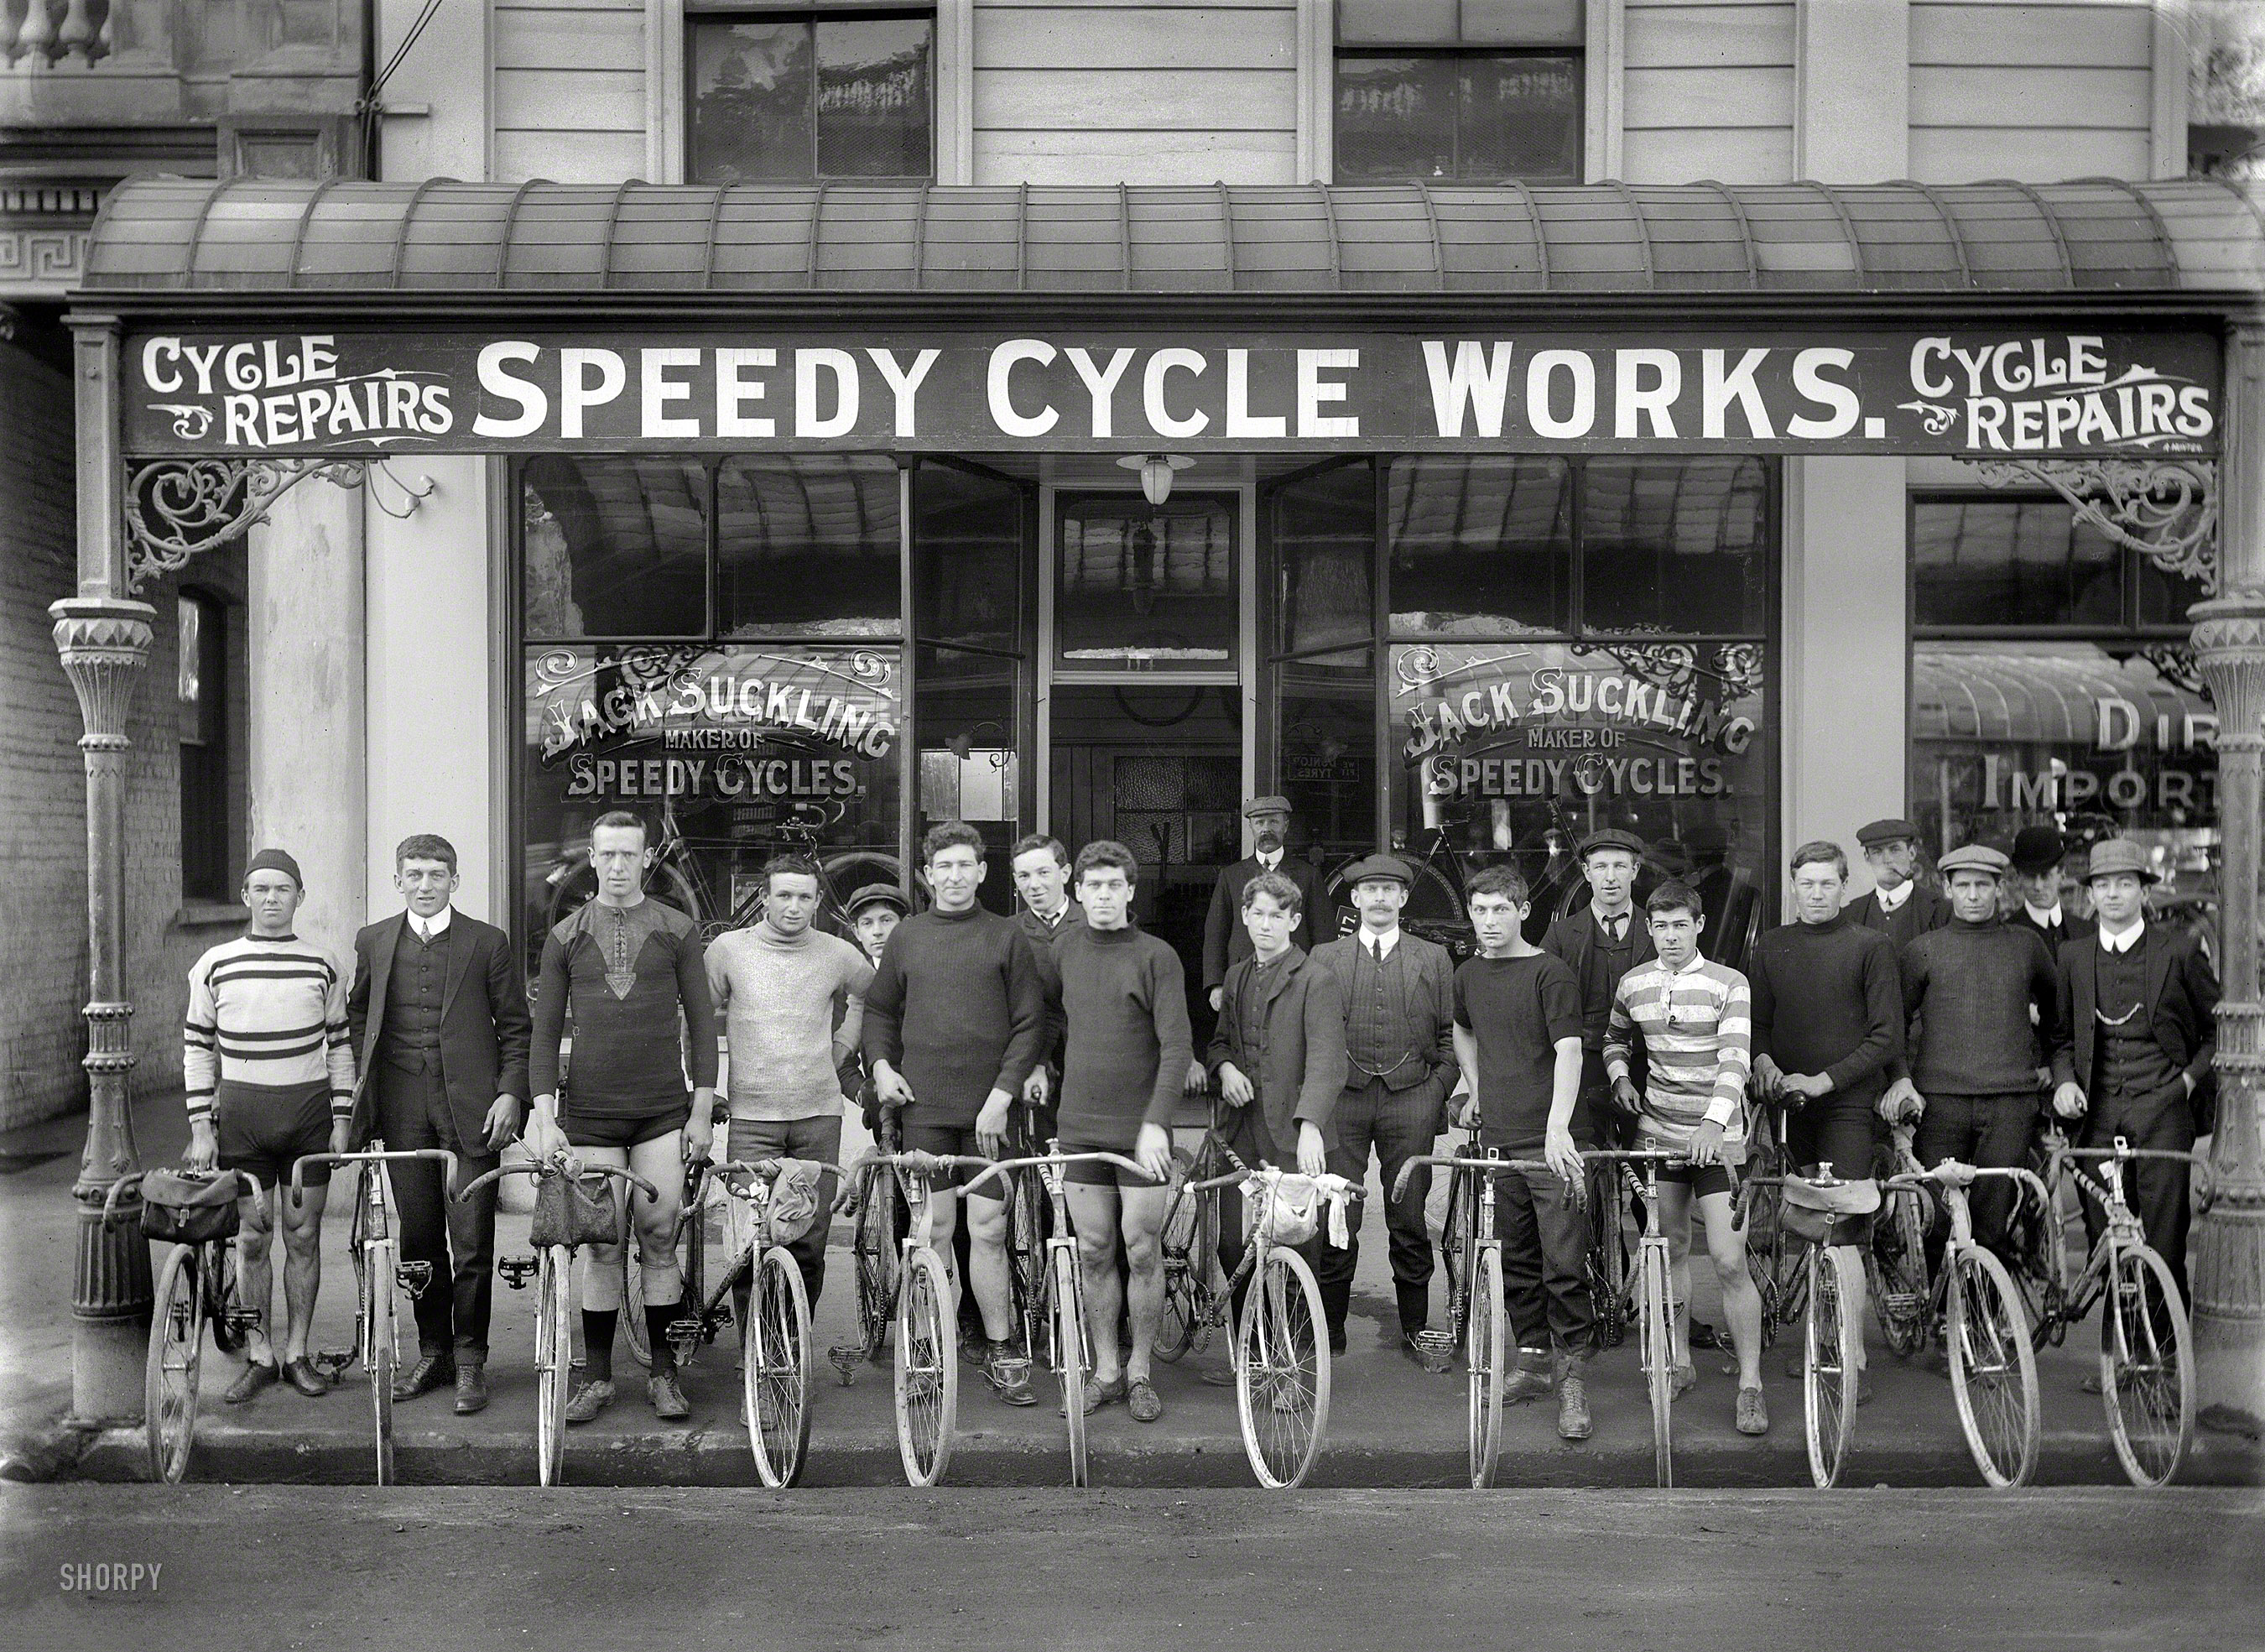 Christchurch, New Zealand, circa 1913. "Jack Suckling (center right with watch chain) and cyclists outside Speedy Cycle Works, Manchester Street. Champion cyclist Phil O'Shea is third from right." Photo by Adam Maclay. View full size.